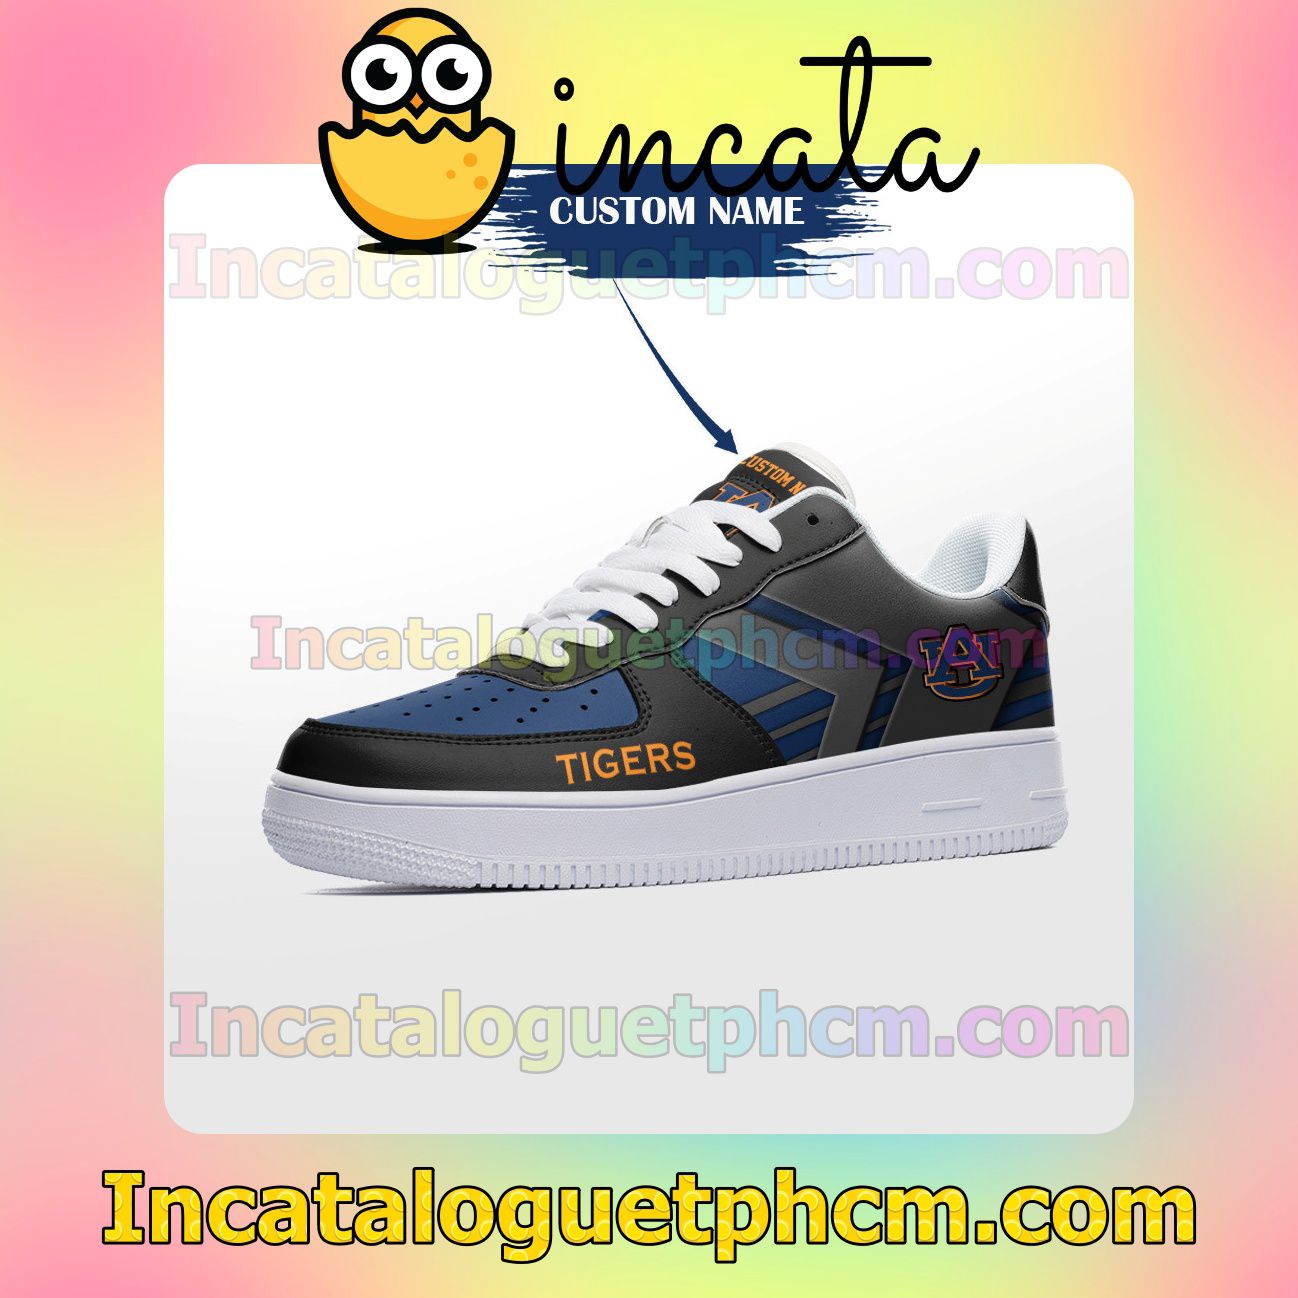 New Personalized NCAA Auburn Tigers Custom Name Nike Low Shoes Sneakers